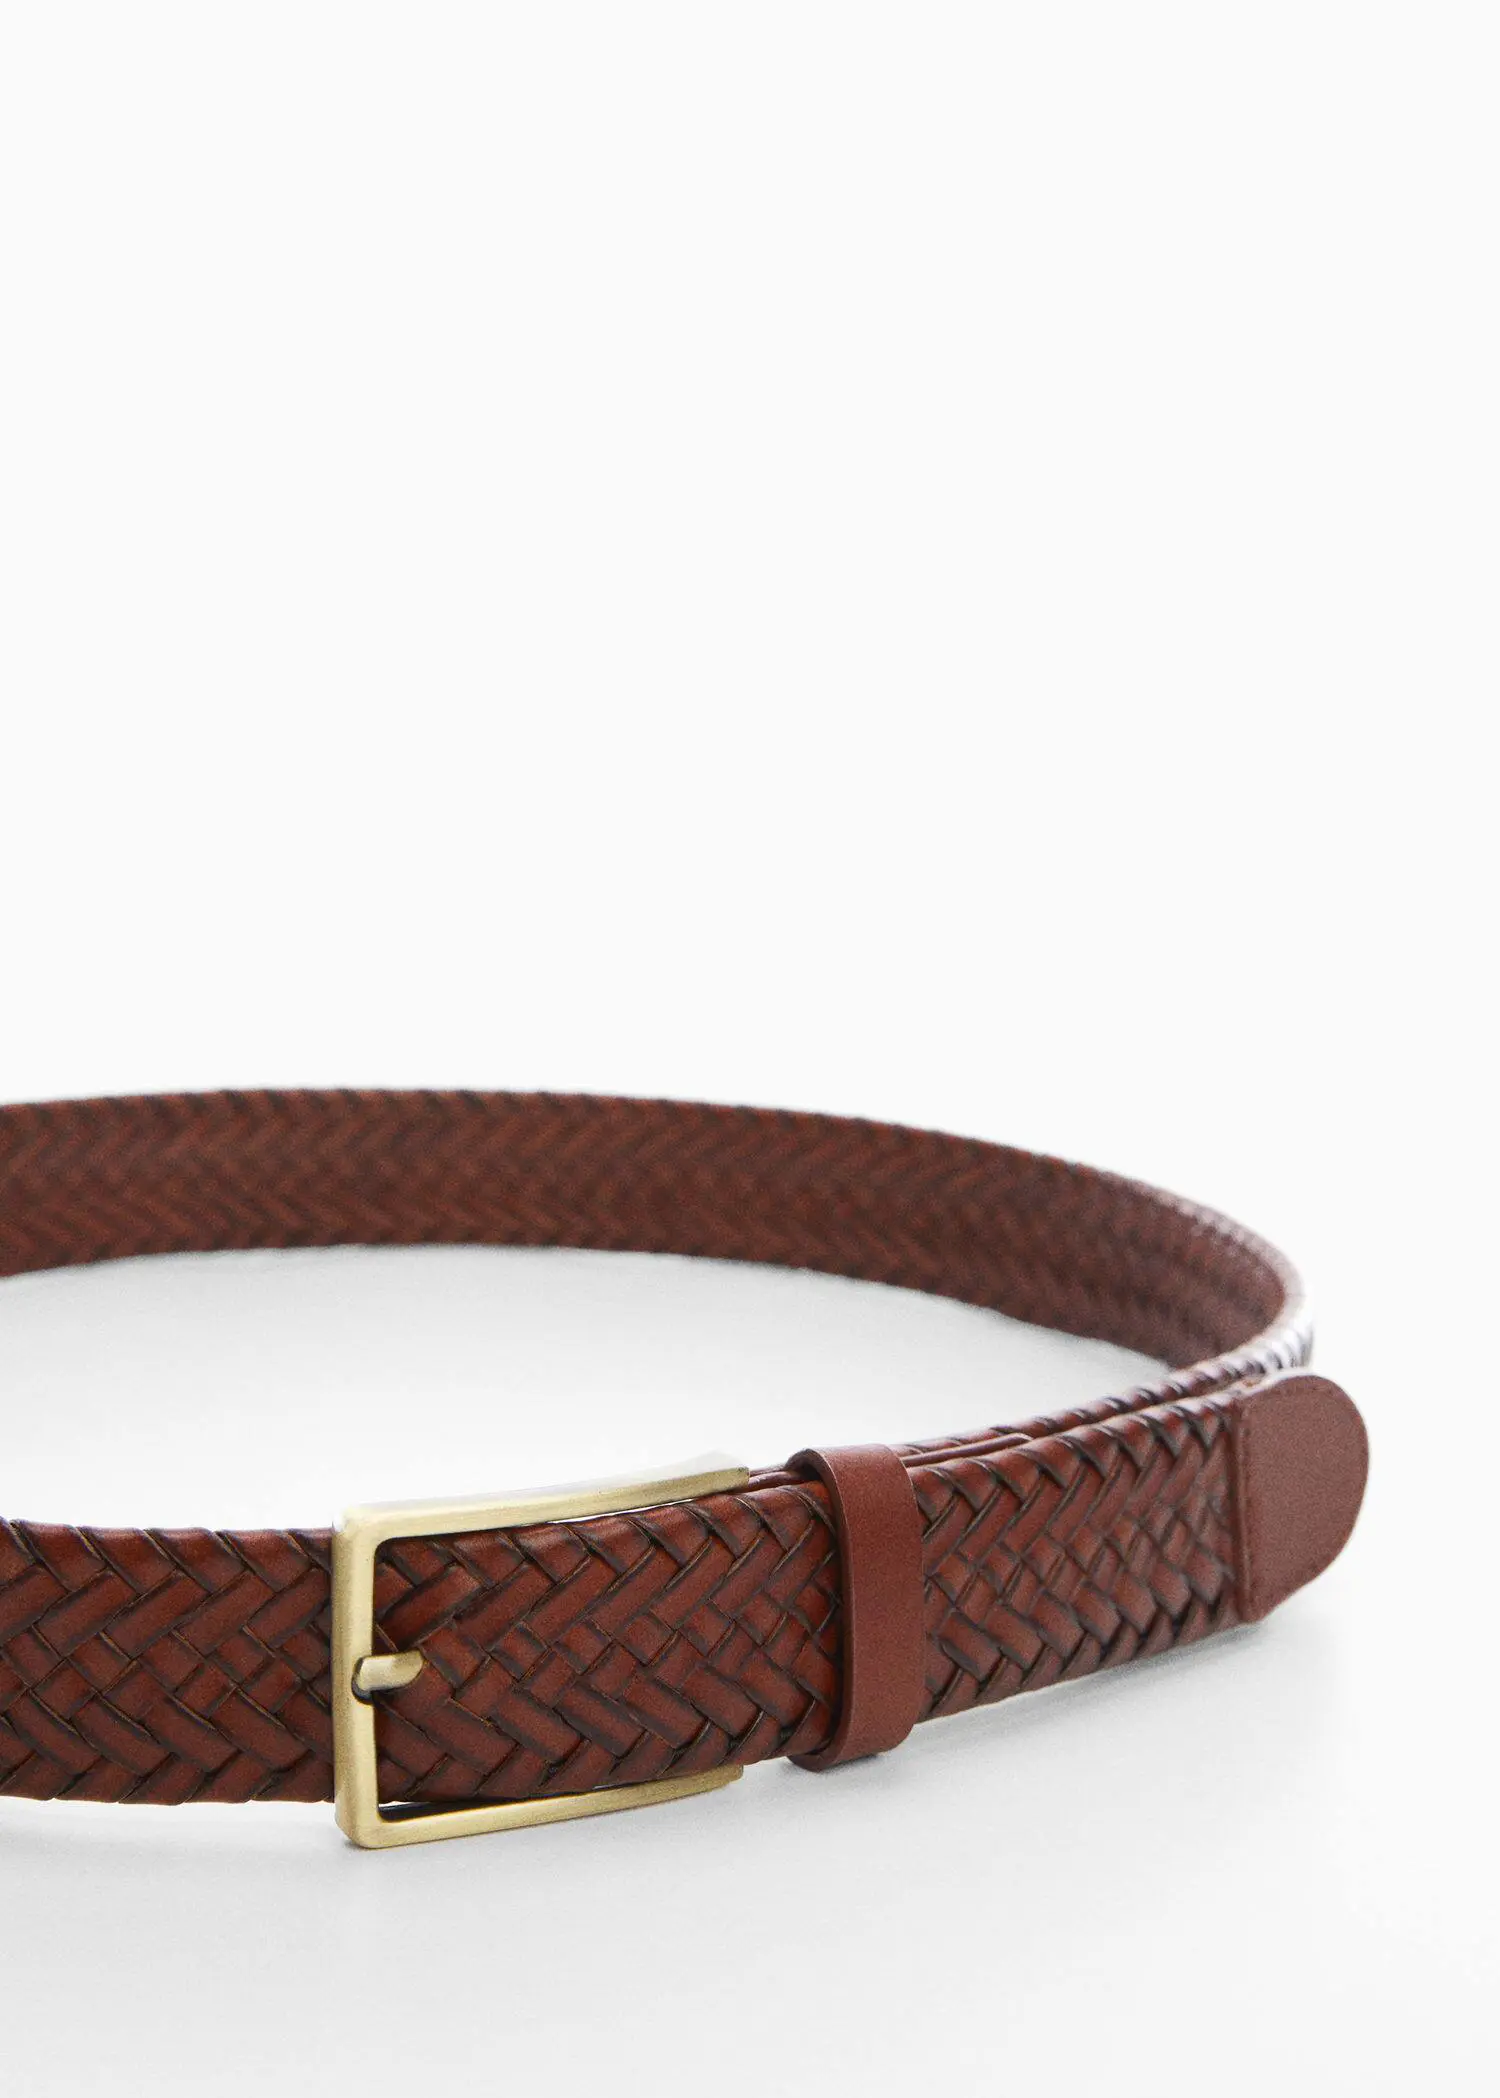 Mango Braided leather belt. a close-up of a brown leather belt with a gold buckle. 